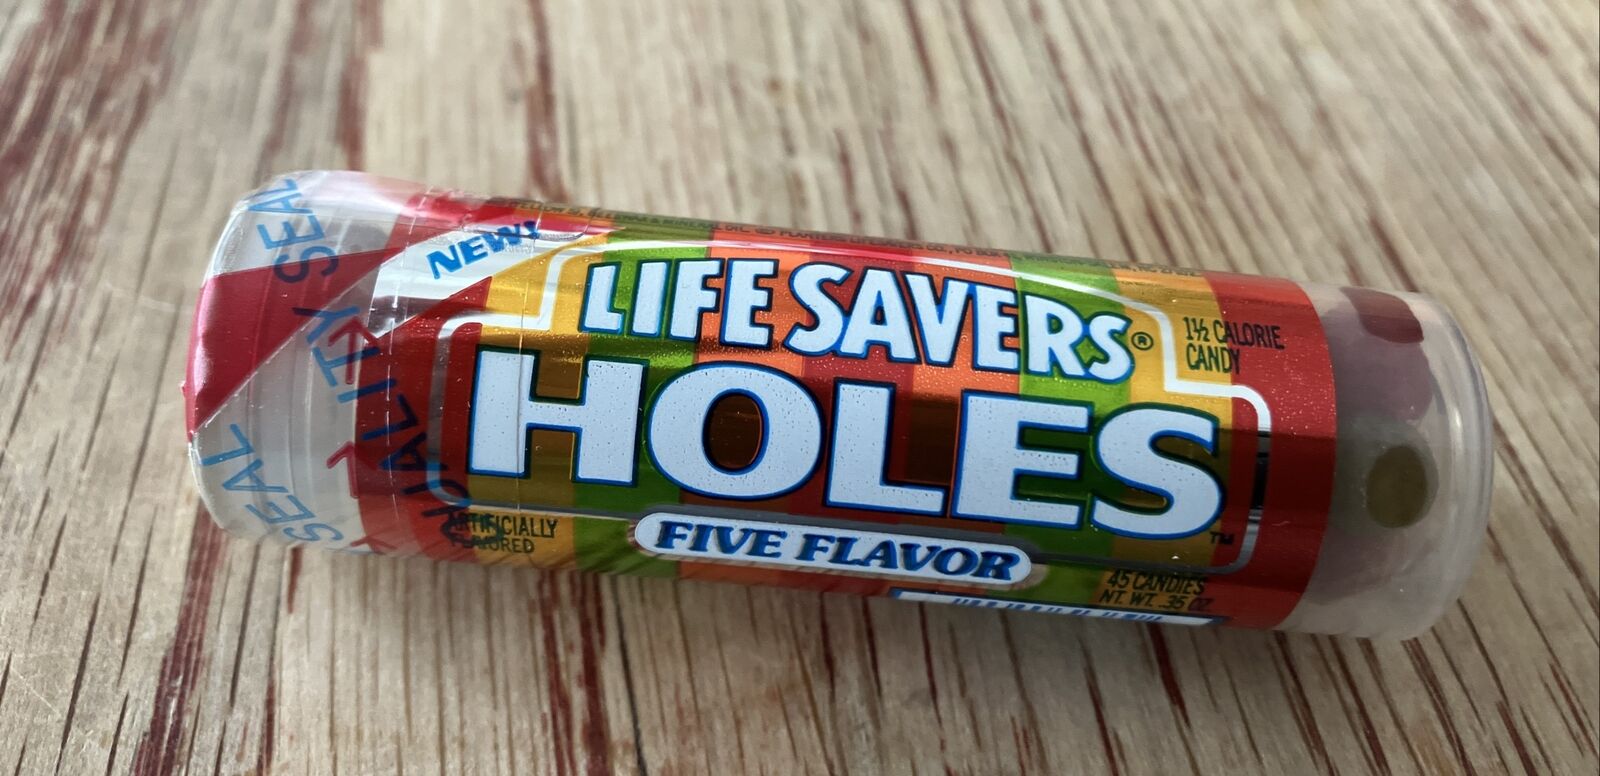 1980s Life Savers Holes Five Flavor New Sealed